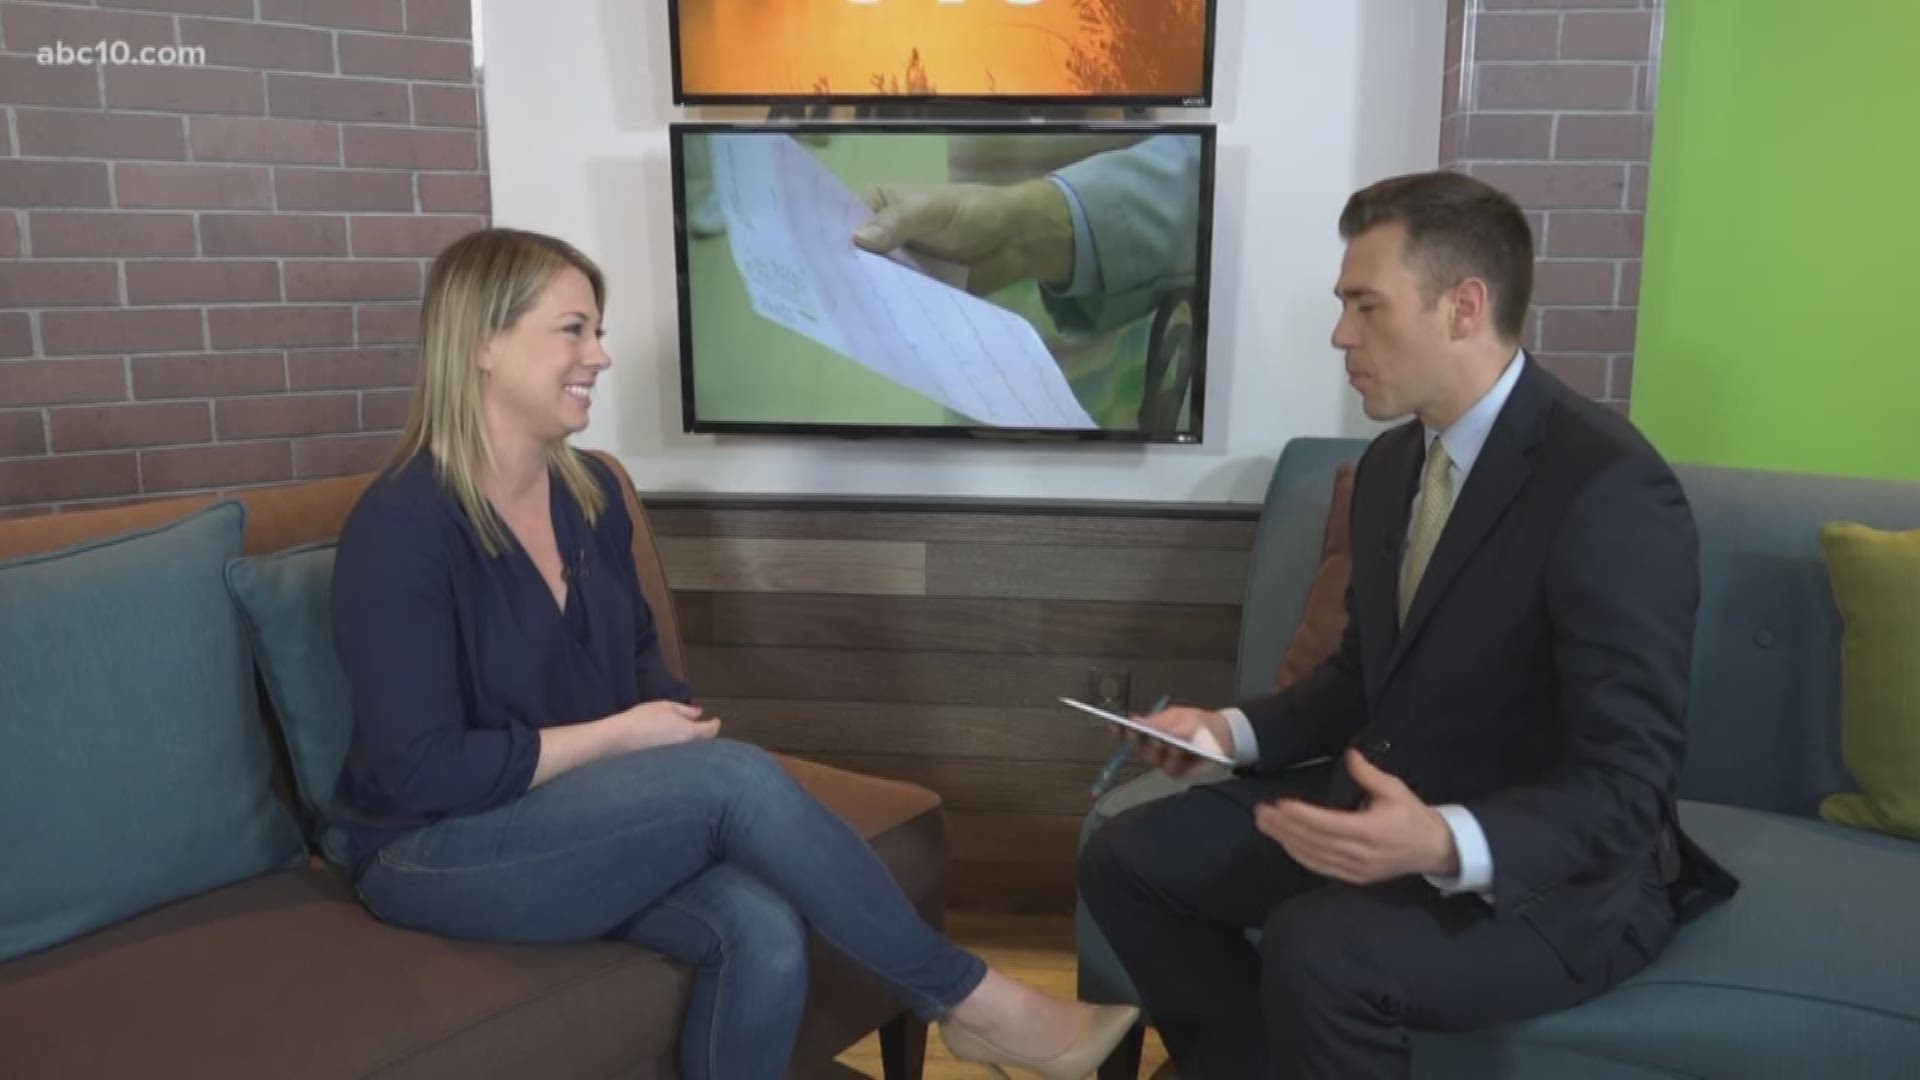 February is American Heart Month. Sacramento's Right at Home Director of Sales Lyndsey Franceschi talks about ways you can strengthen your heart and improve your health.